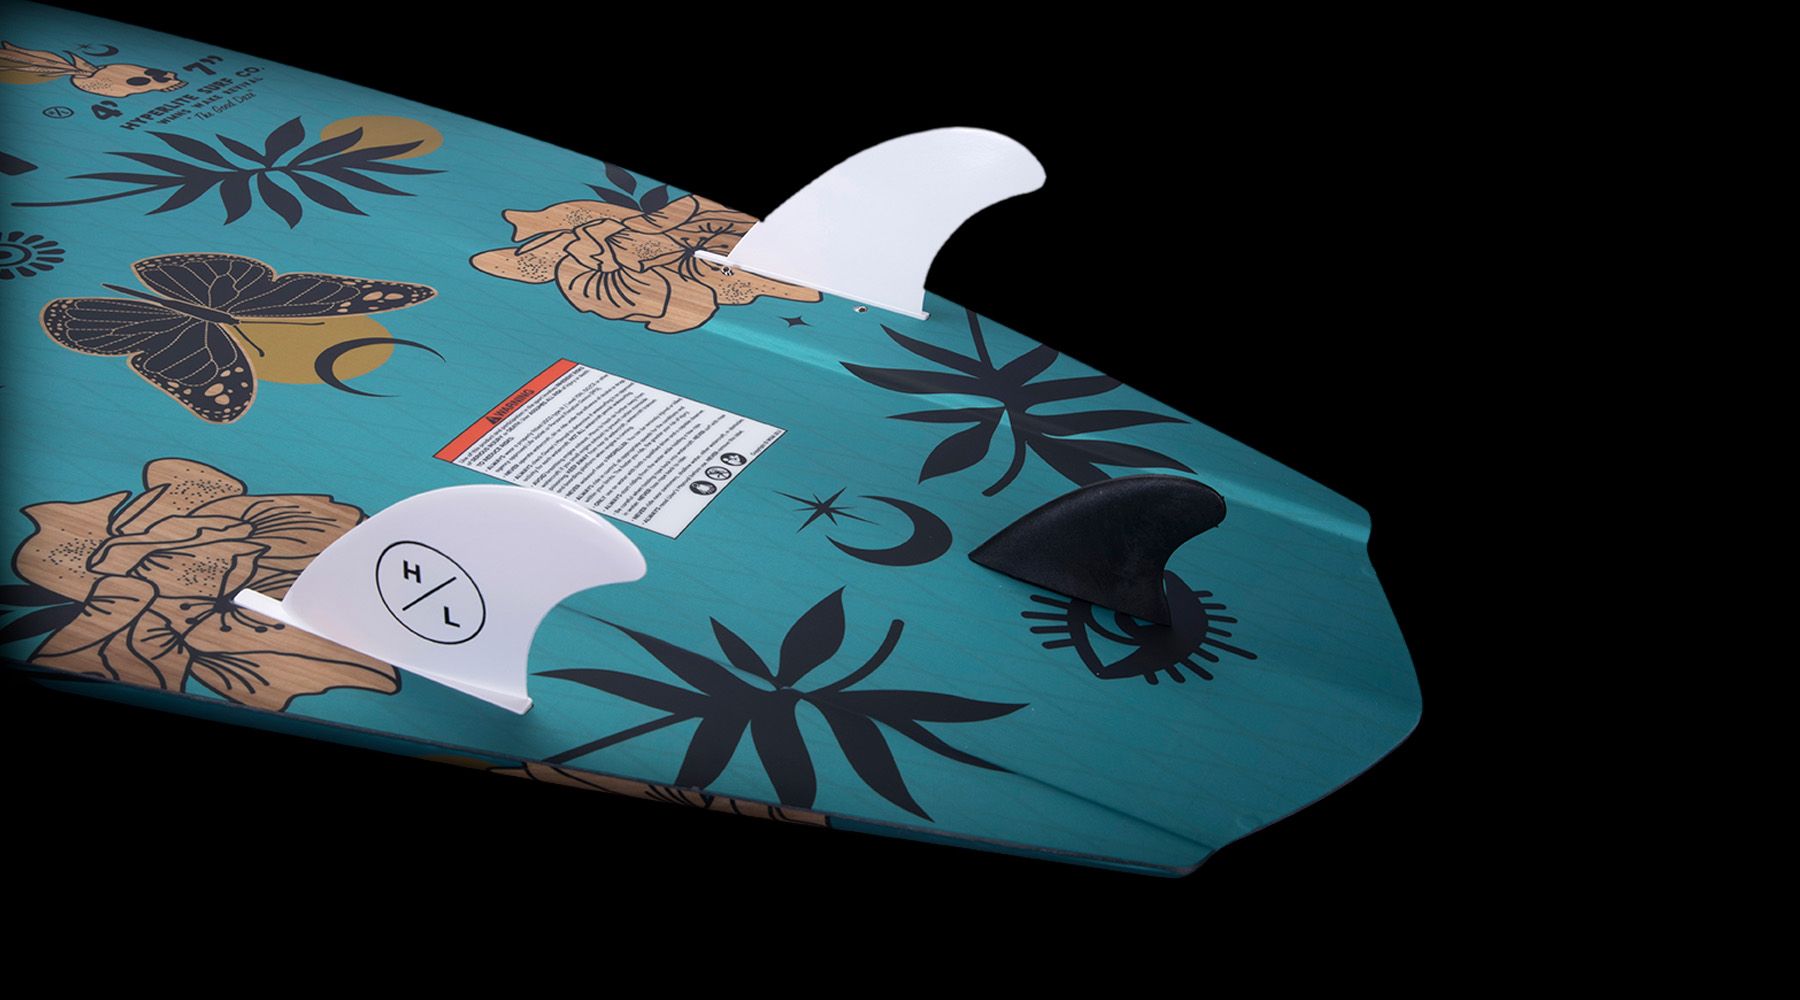 A Hyperlite 2024 Good Daze Women's Wakesurf Board with a flower design on it, perfect for wakesurf enthusiasts and beginner to intermediate riders looking to have some good daze on the water.